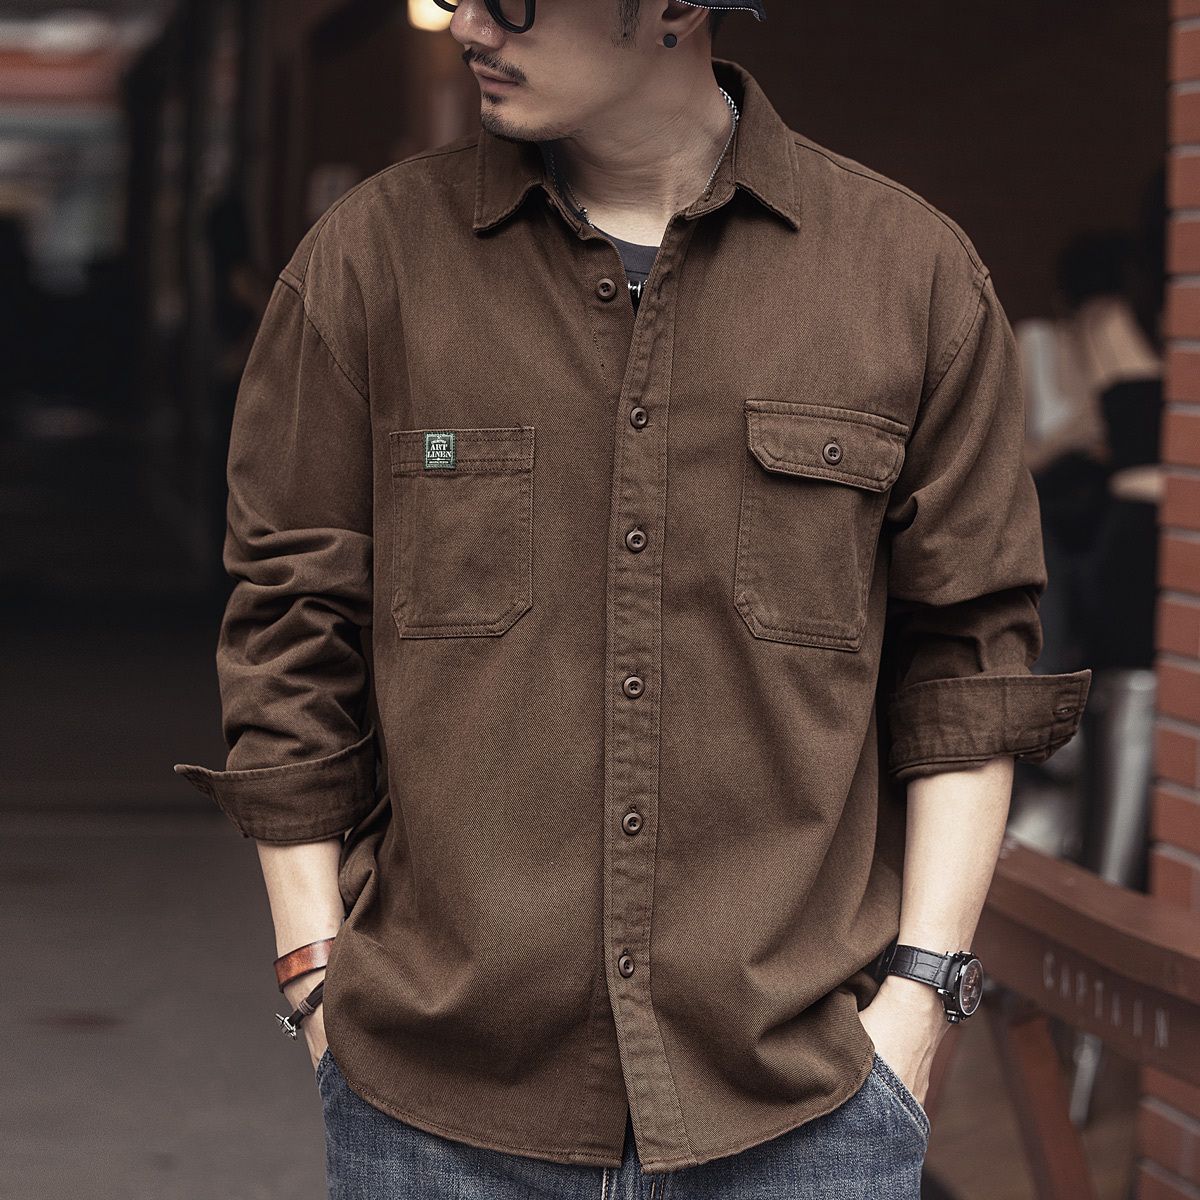 Spring and Autumn style American retro workwear long-sleeved shirt men's trendy brand pure cotton hunting suit loose casual vintage shirt jacket